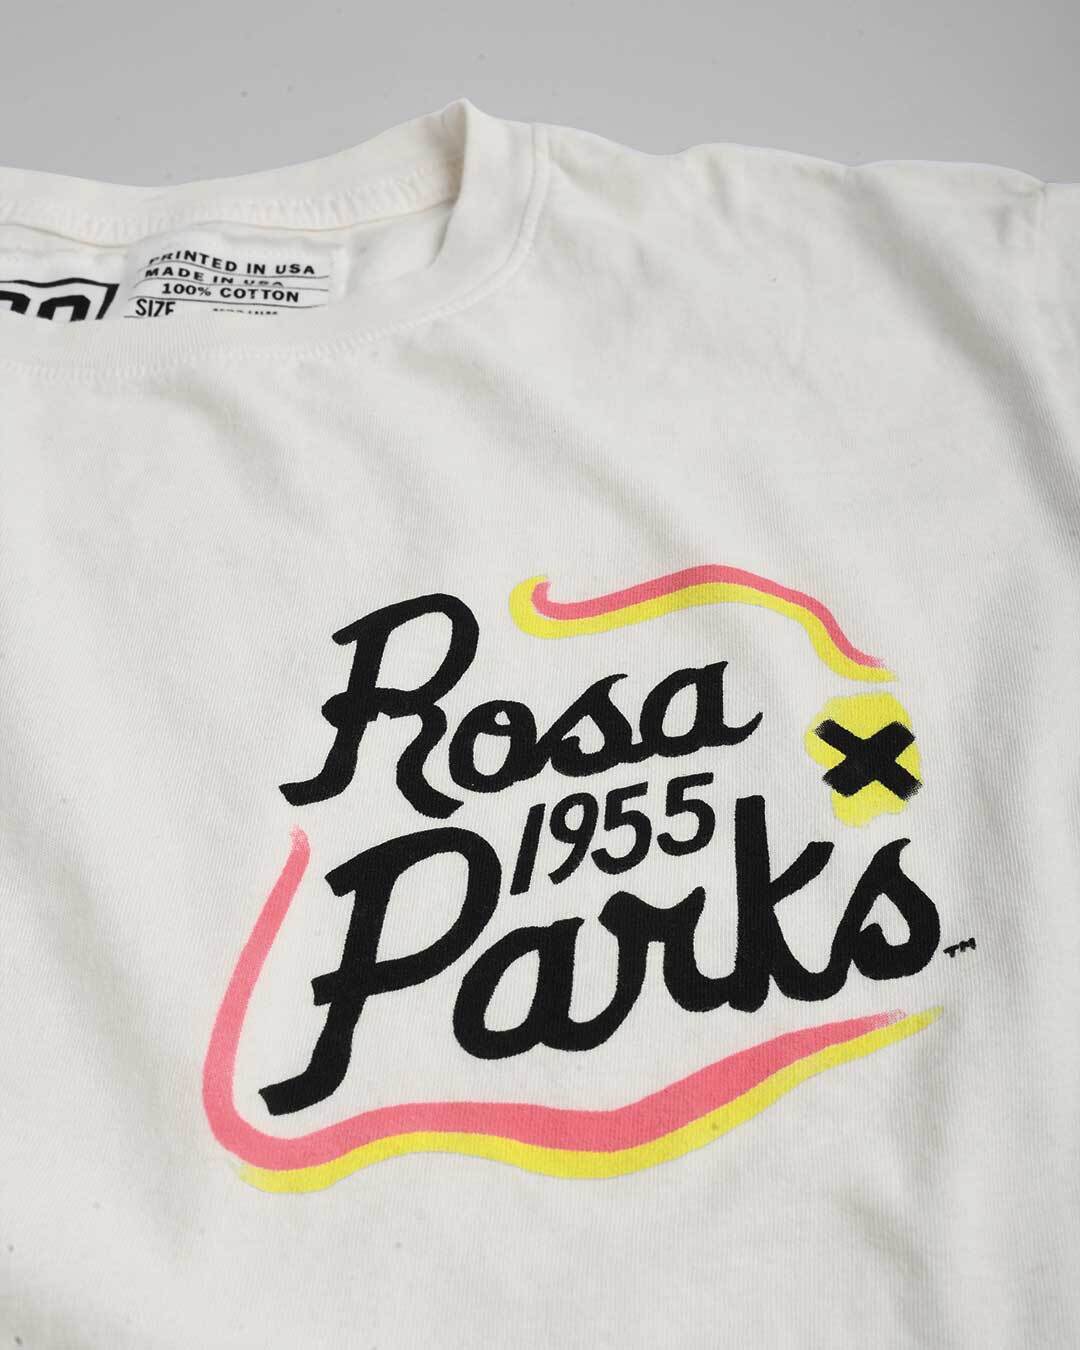 BHT - Rosa Parks 1955 White Tee - Roots of Fight